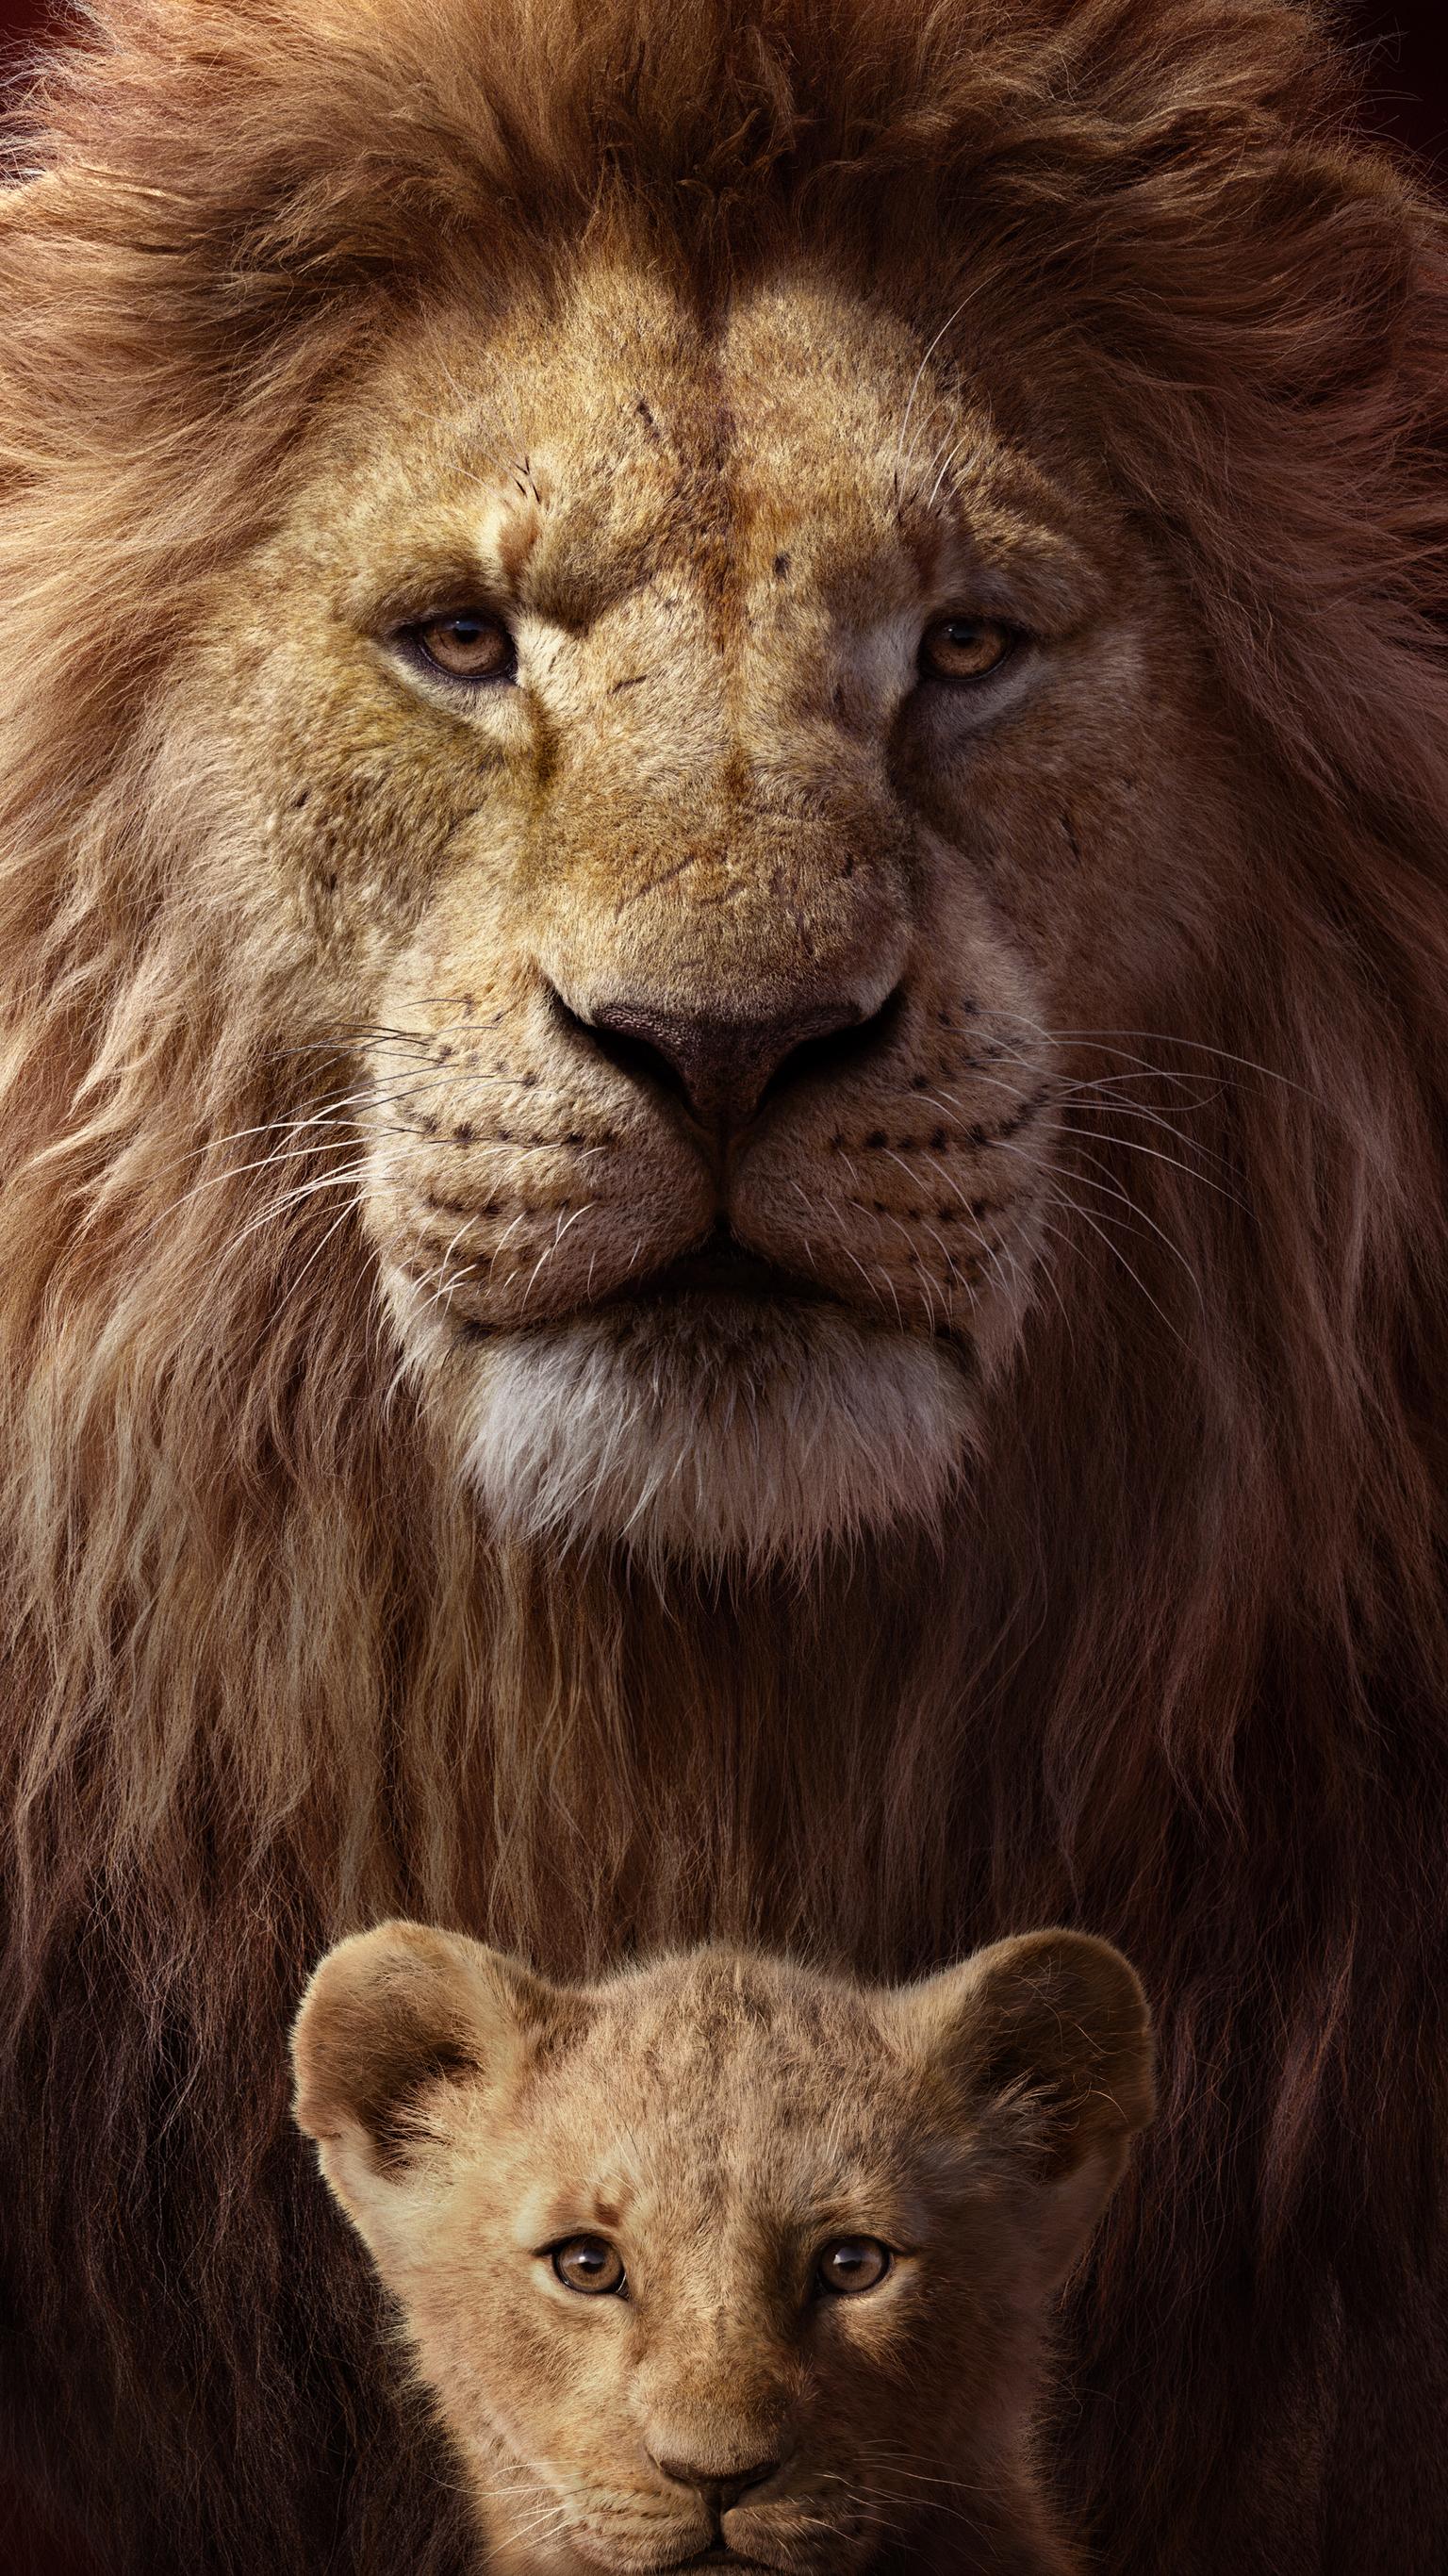 The Lion King 2019 Wallpaper Free The Lion King 2019 Background